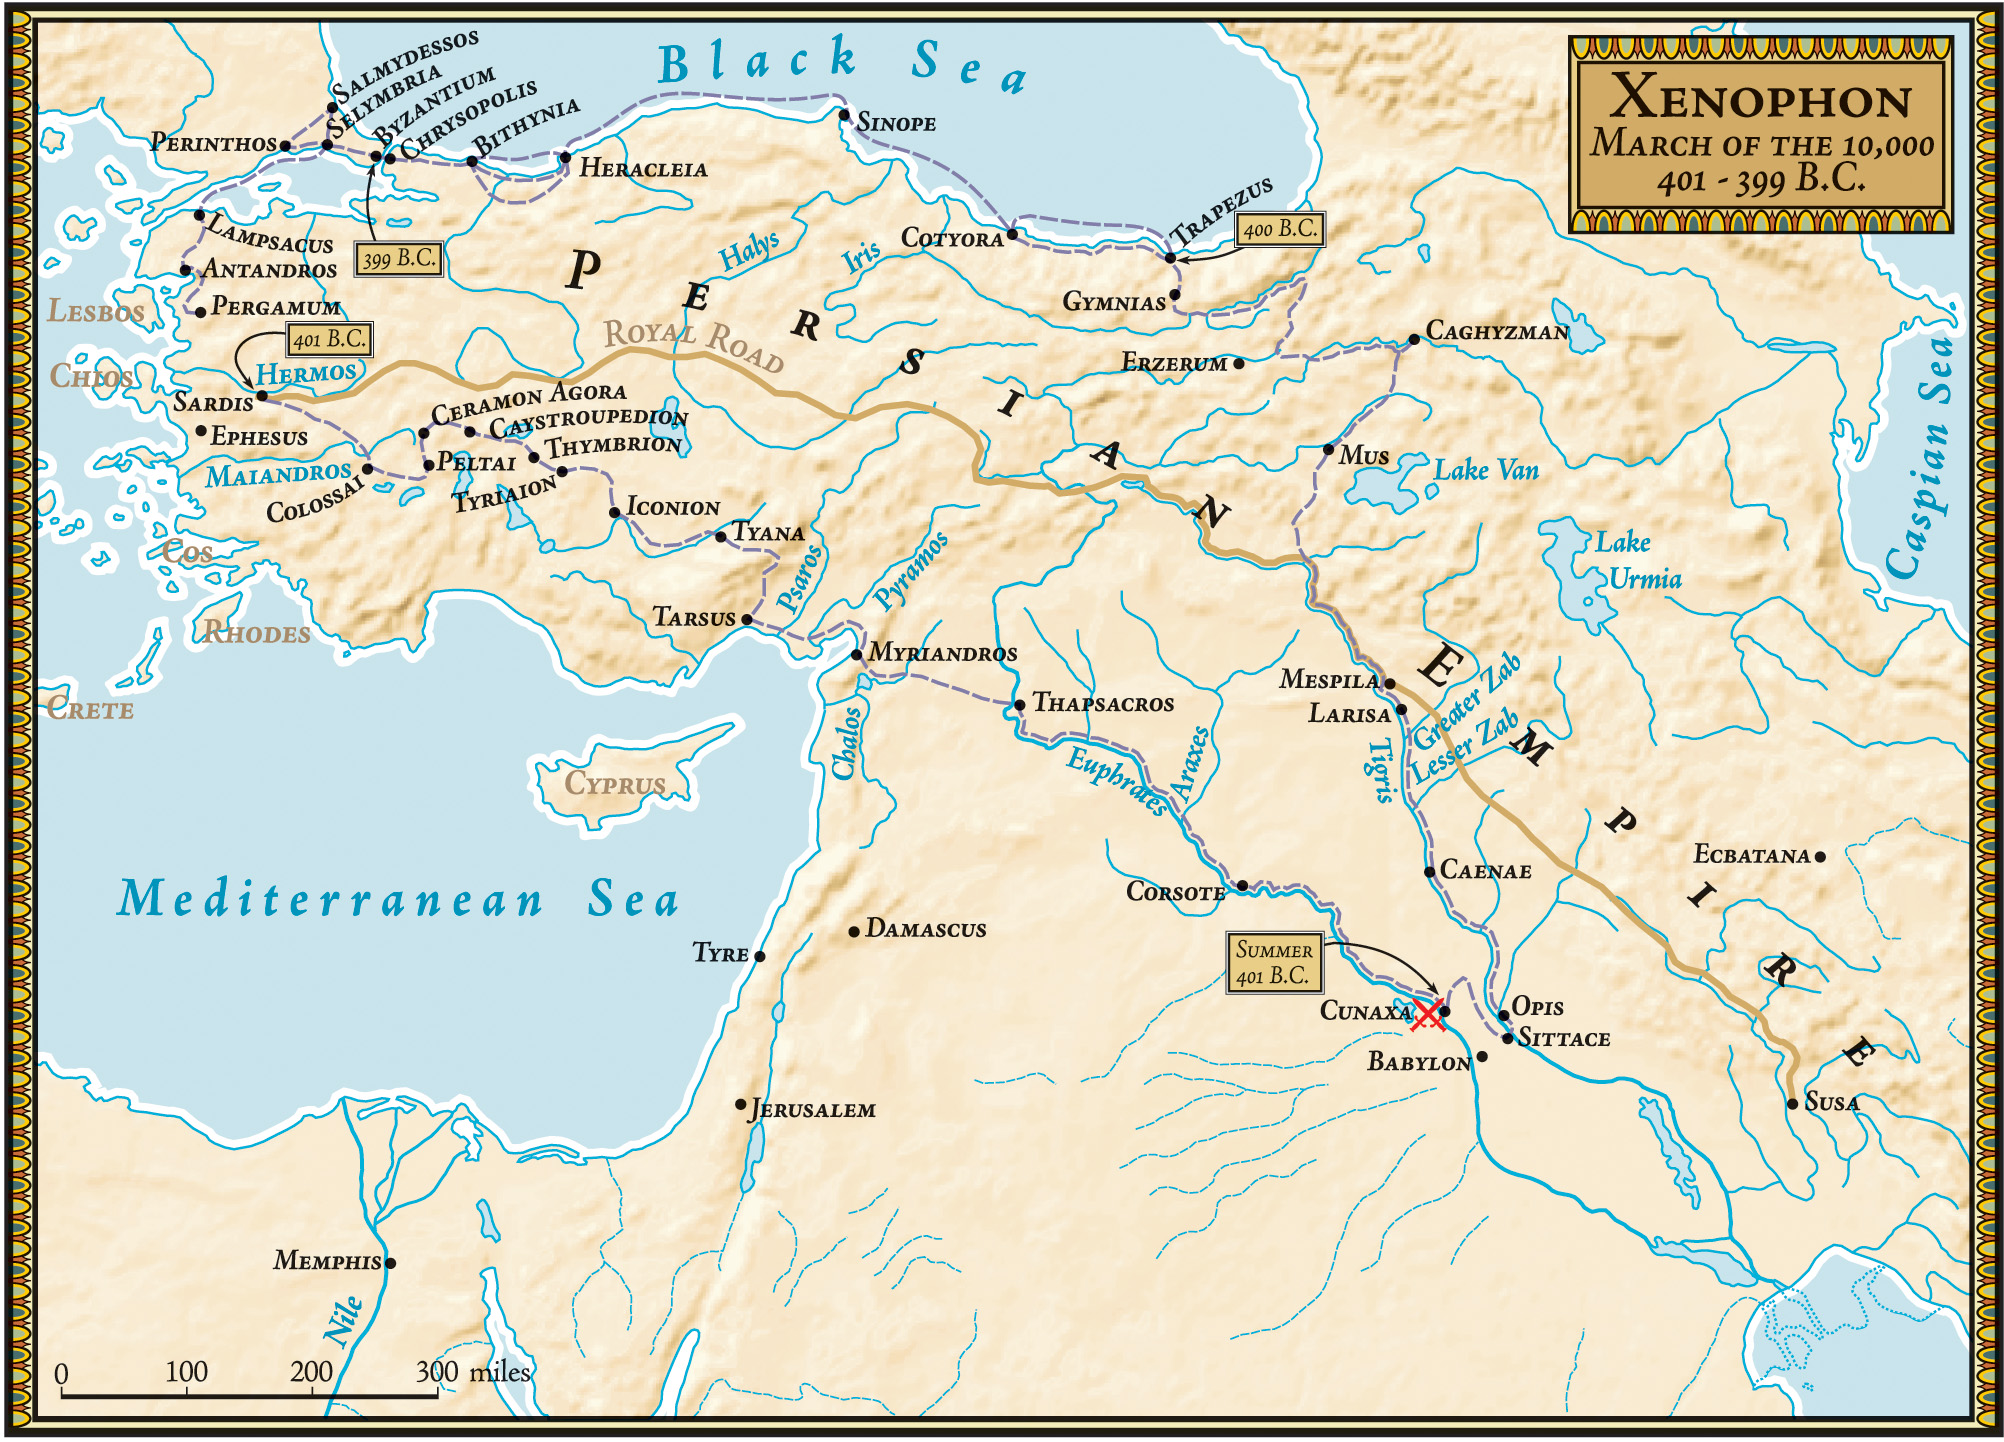 After the Battle of Cunaxa the Greeks followed a dangerous route north to the Black Sea and their homeland.